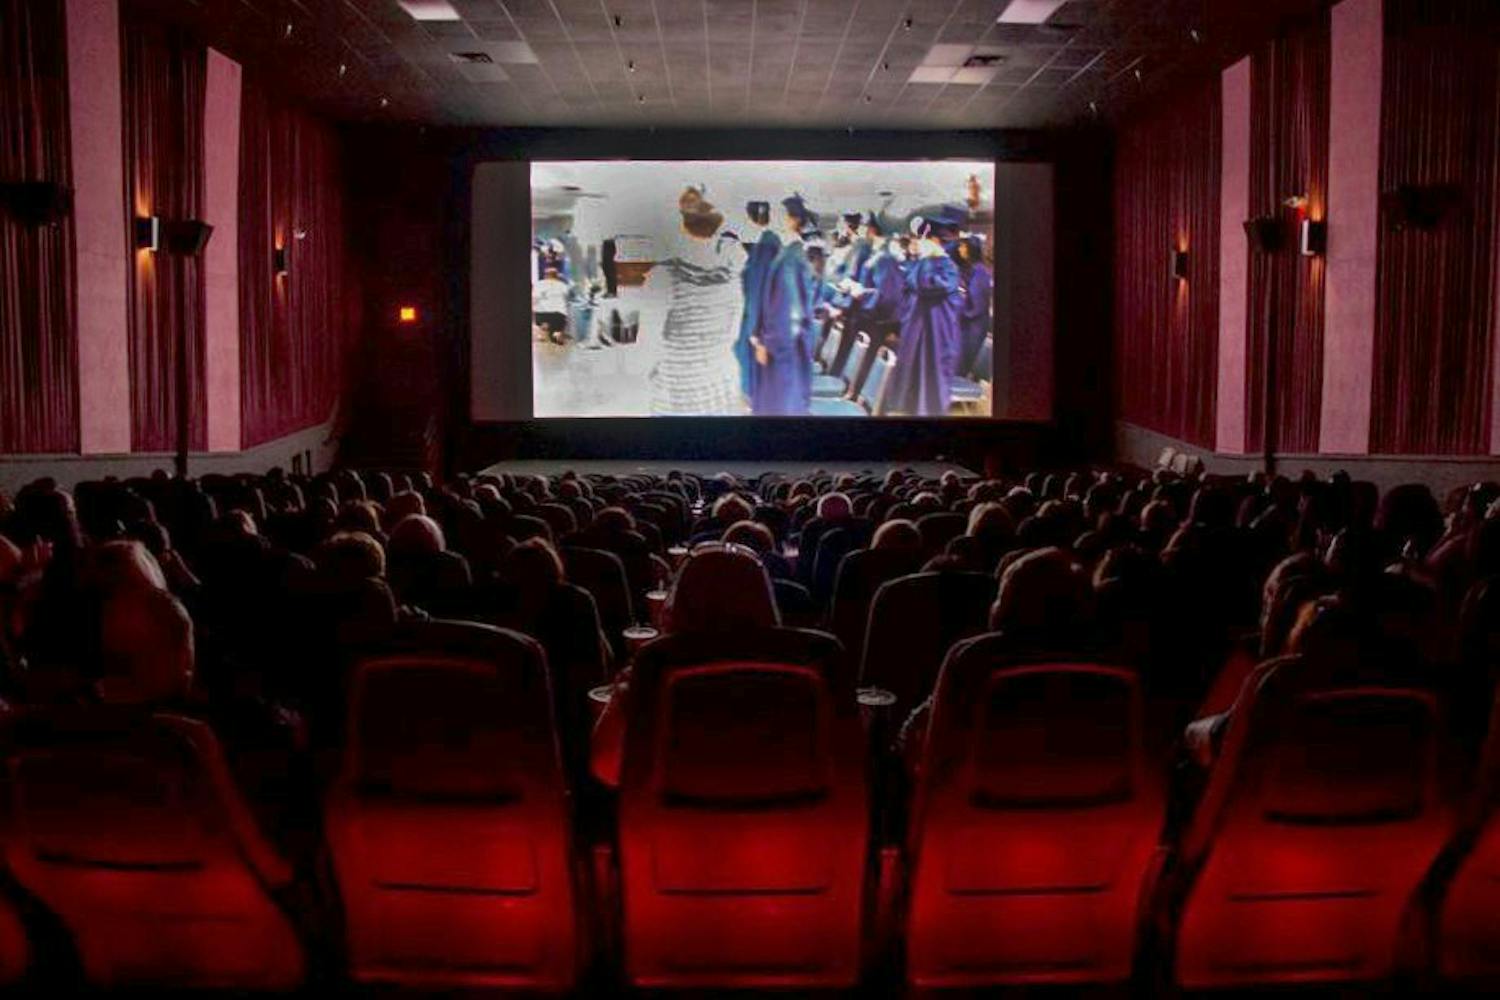 The audience watches a screening of&nbsp;Paper Tigers at a theater in&nbsp;Tempe, Arizona&nbsp;in 2016.